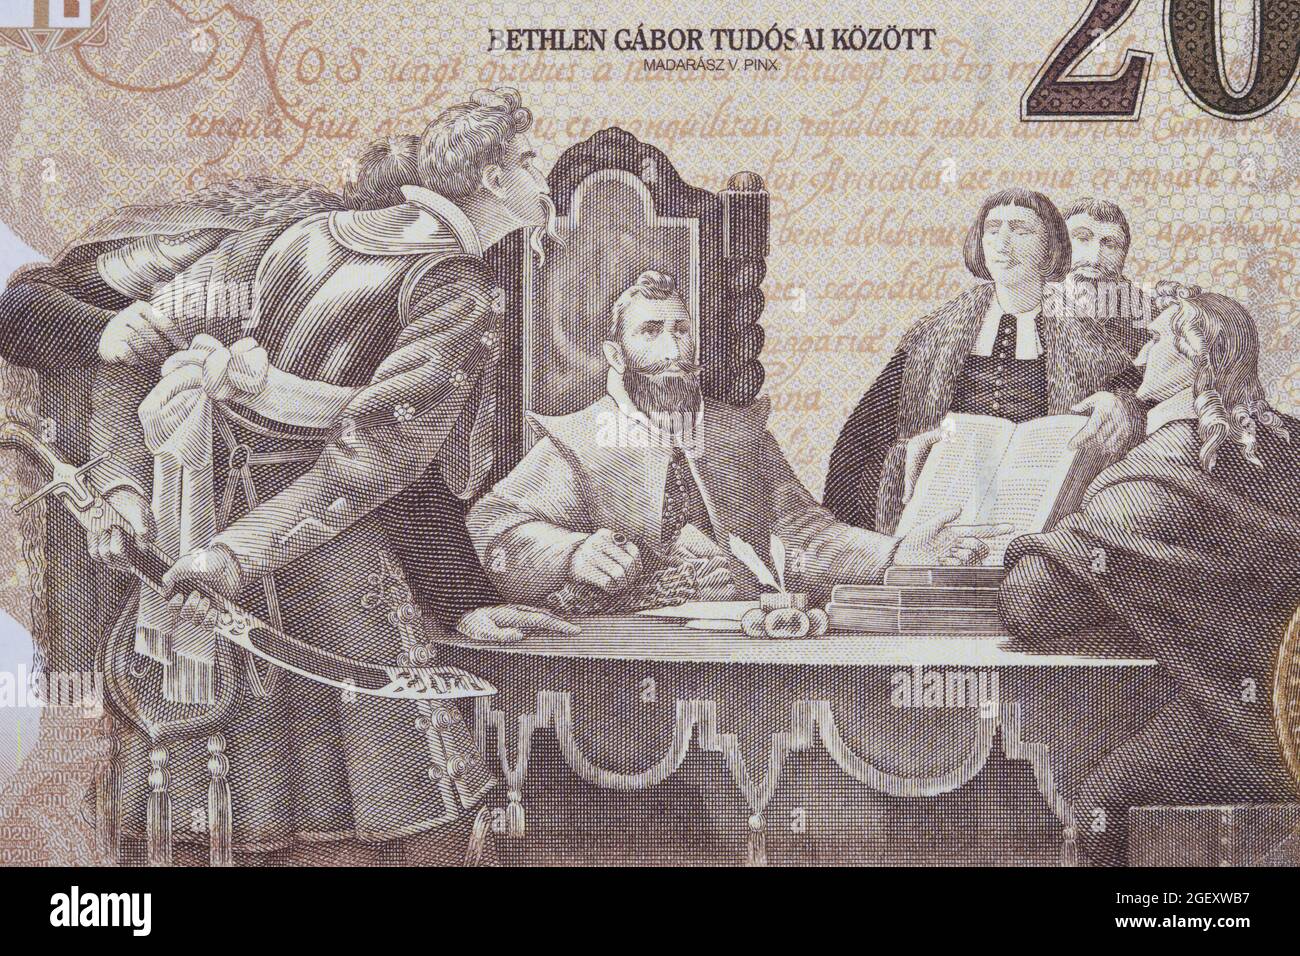 Prince G. Bethlen amongst scientists from Hungarian money - Forint Stock Photo